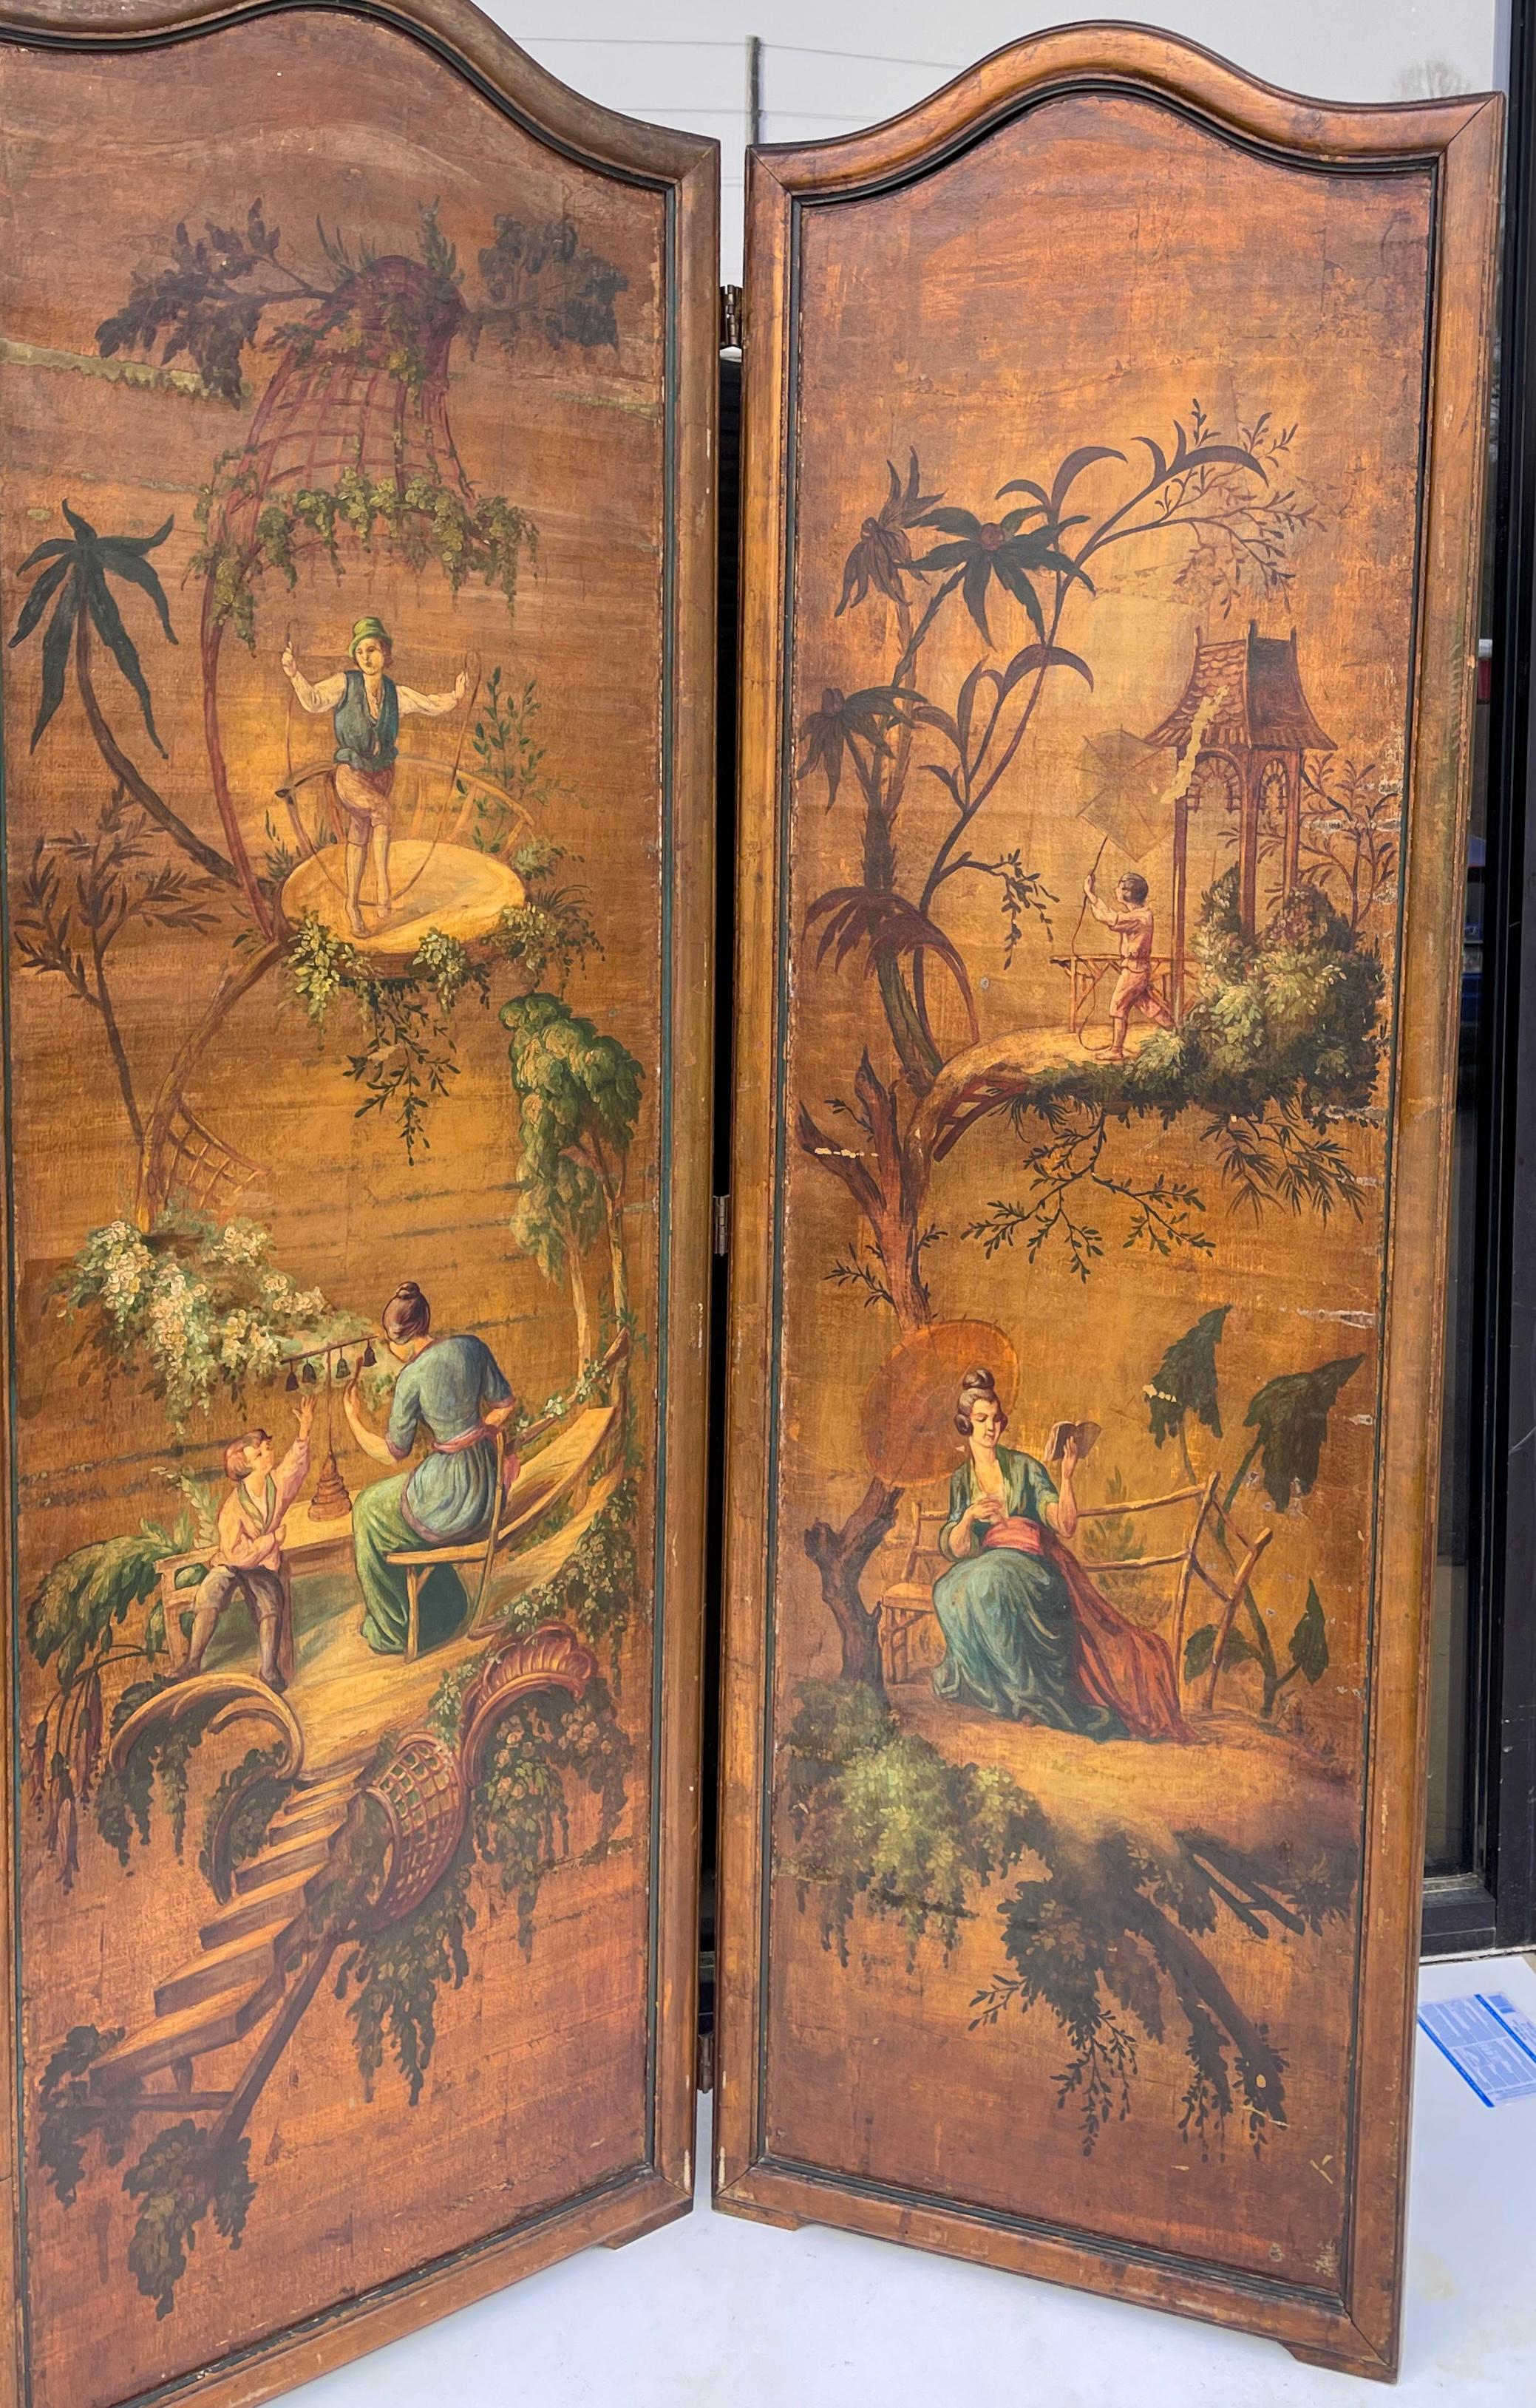 This is an early 20th century French hand painted chinoiserie folding screen. It has three panels and looks wonderful mounted on a wall as well. The piece does show some age wear.